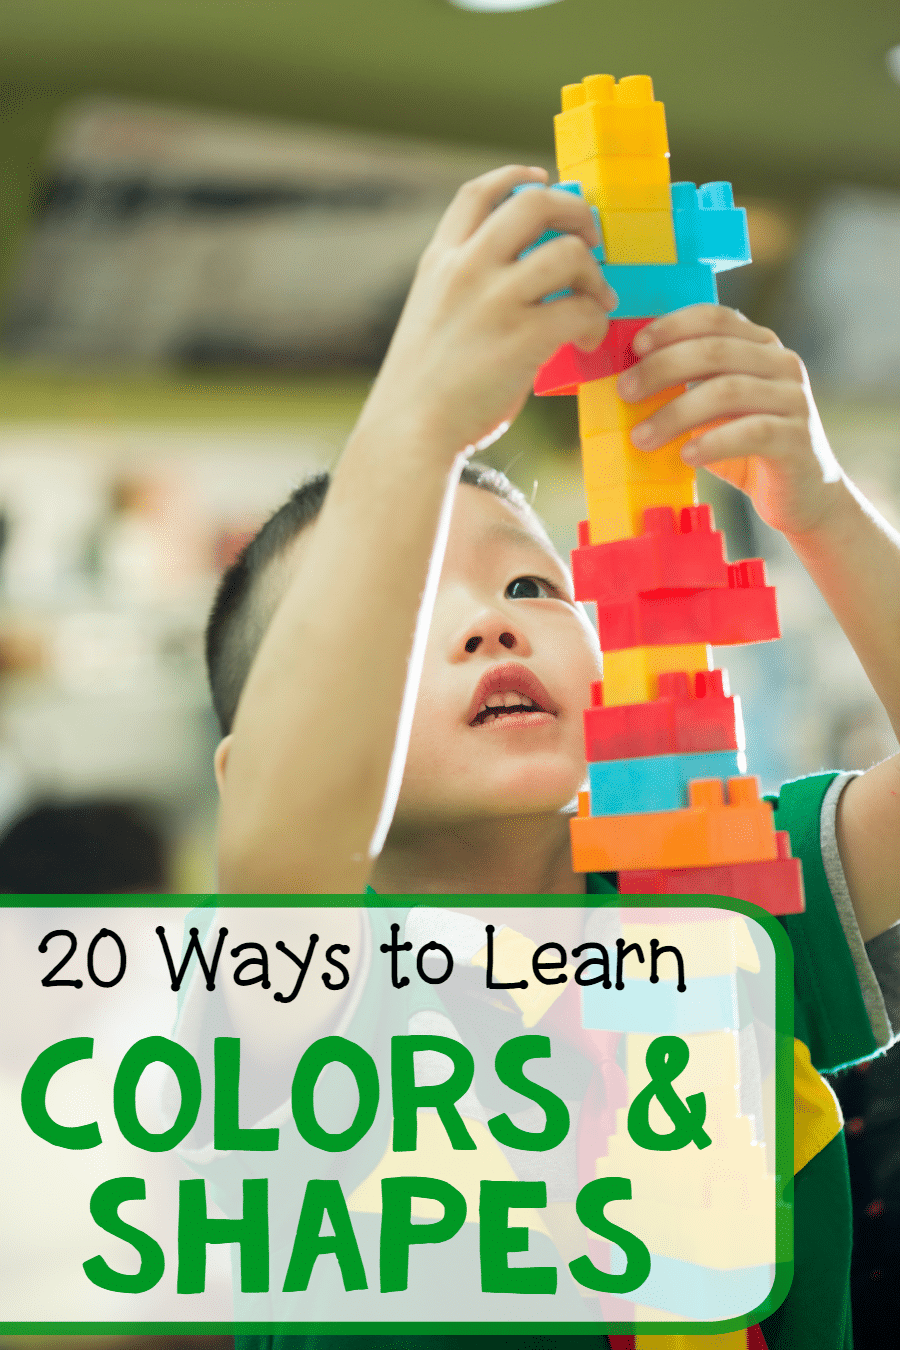 20 Shape and color activities for preschool - The Measured Mom